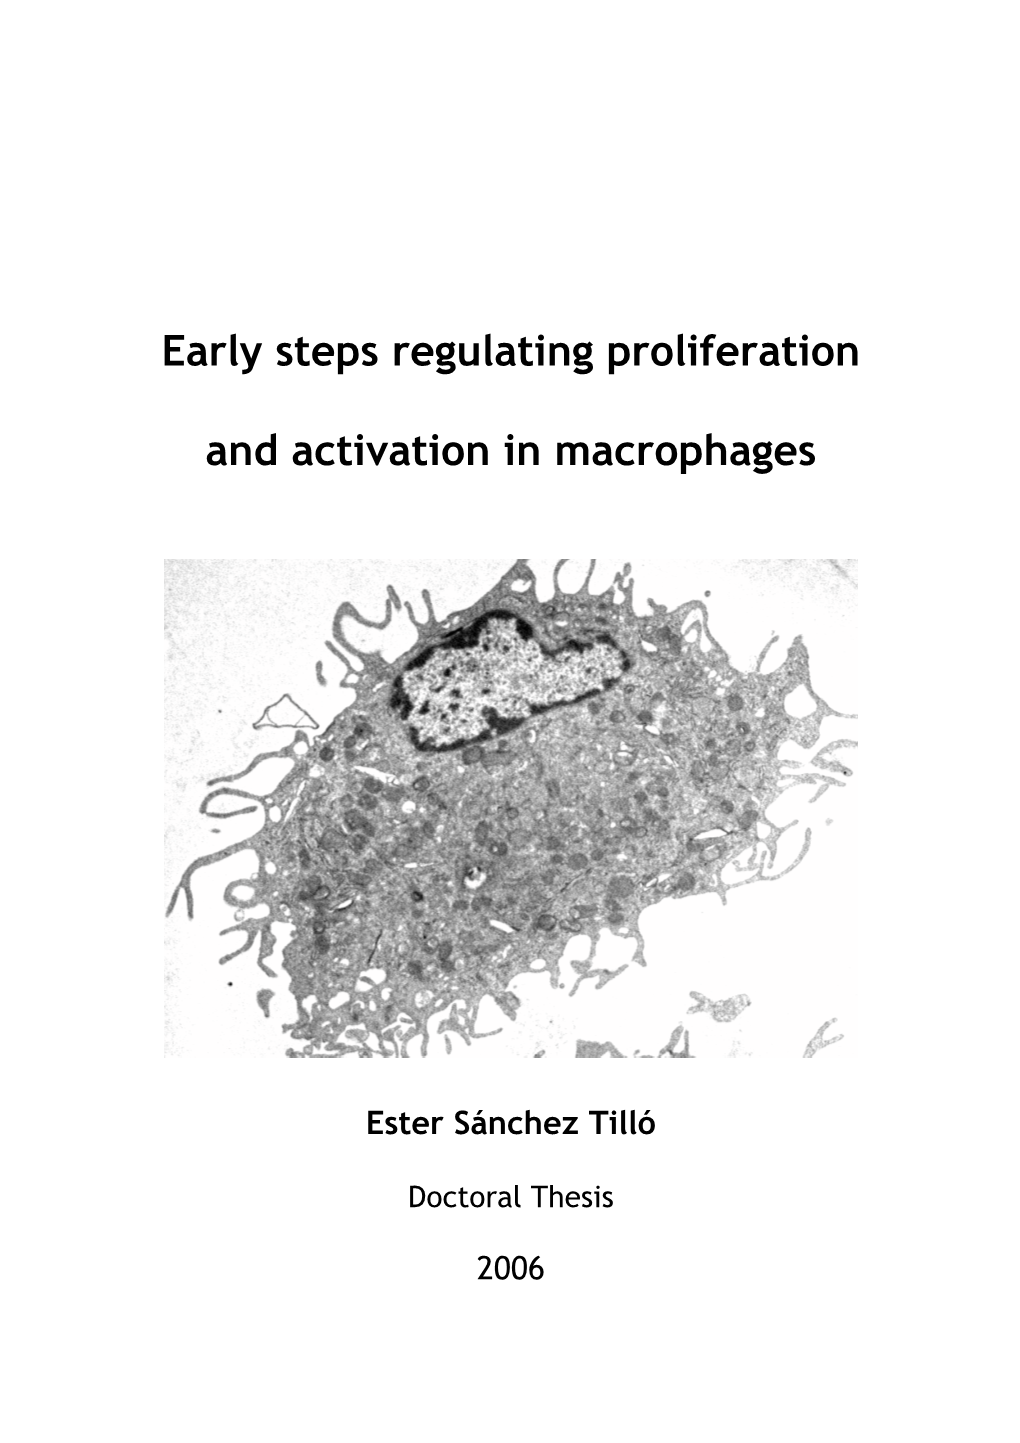 Early Steps Regulating Proliferation and Activation in Macrophages